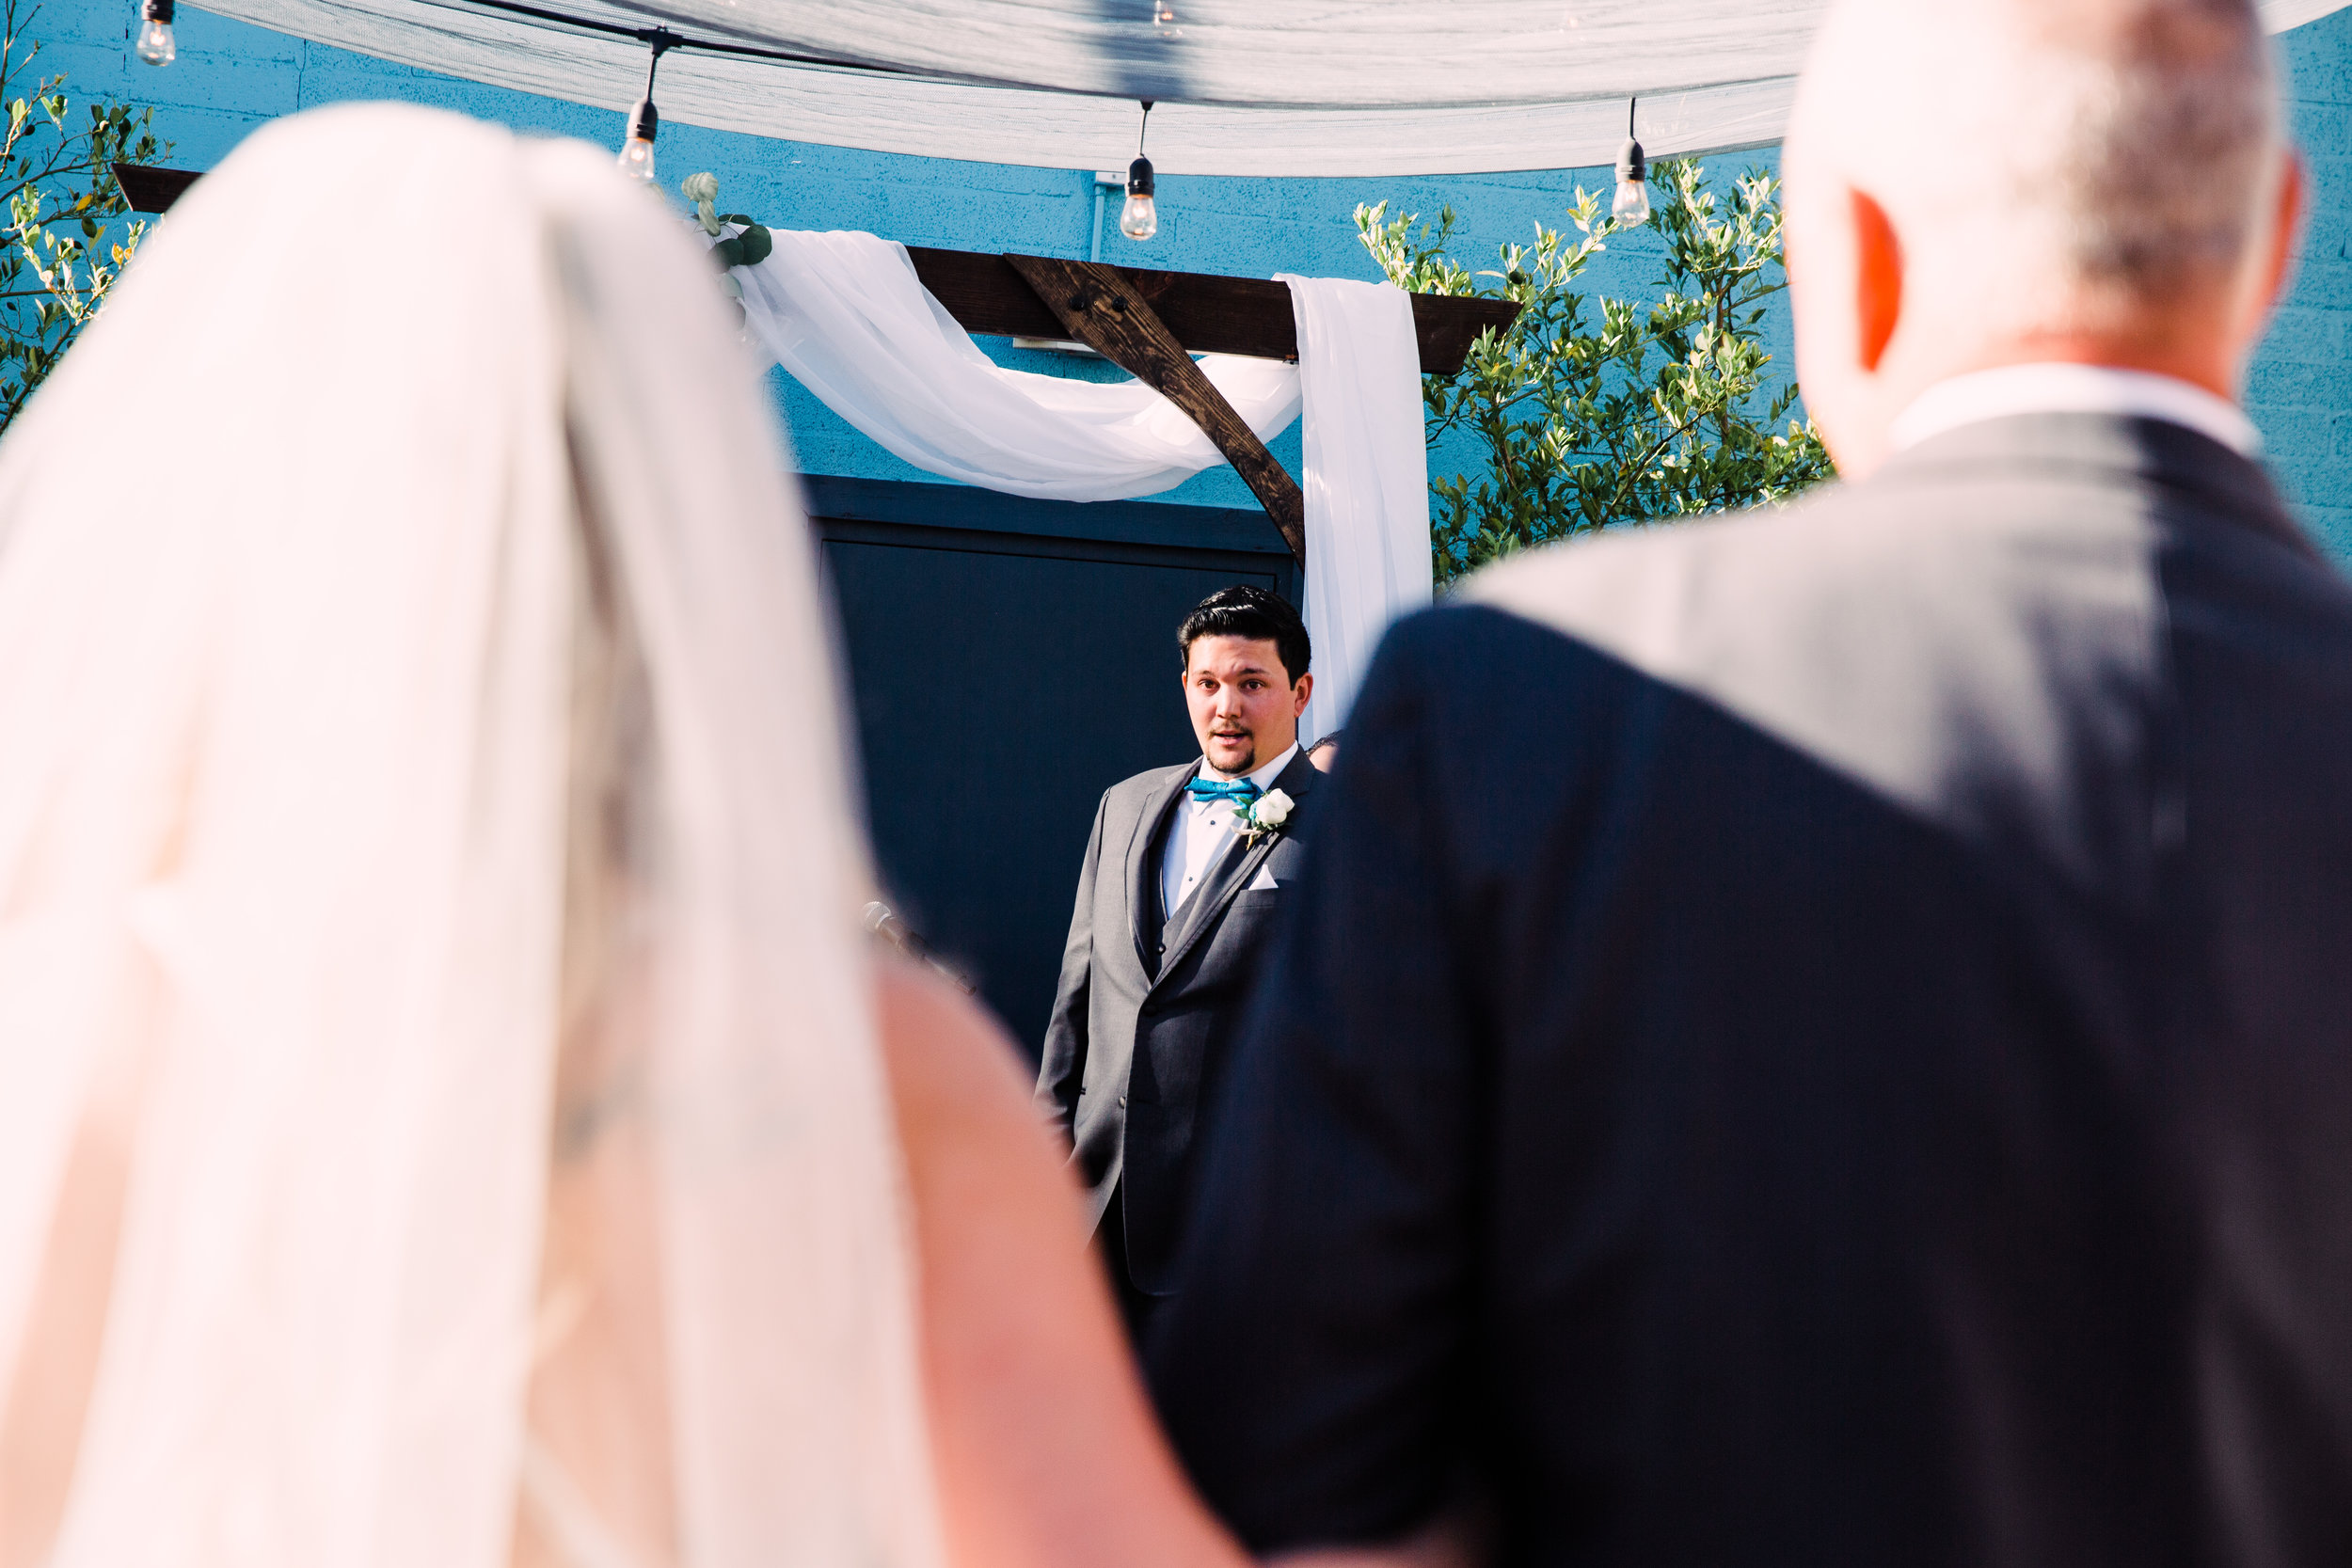 Aaron’s face when he saw Courtney walking down the aisle for the first time